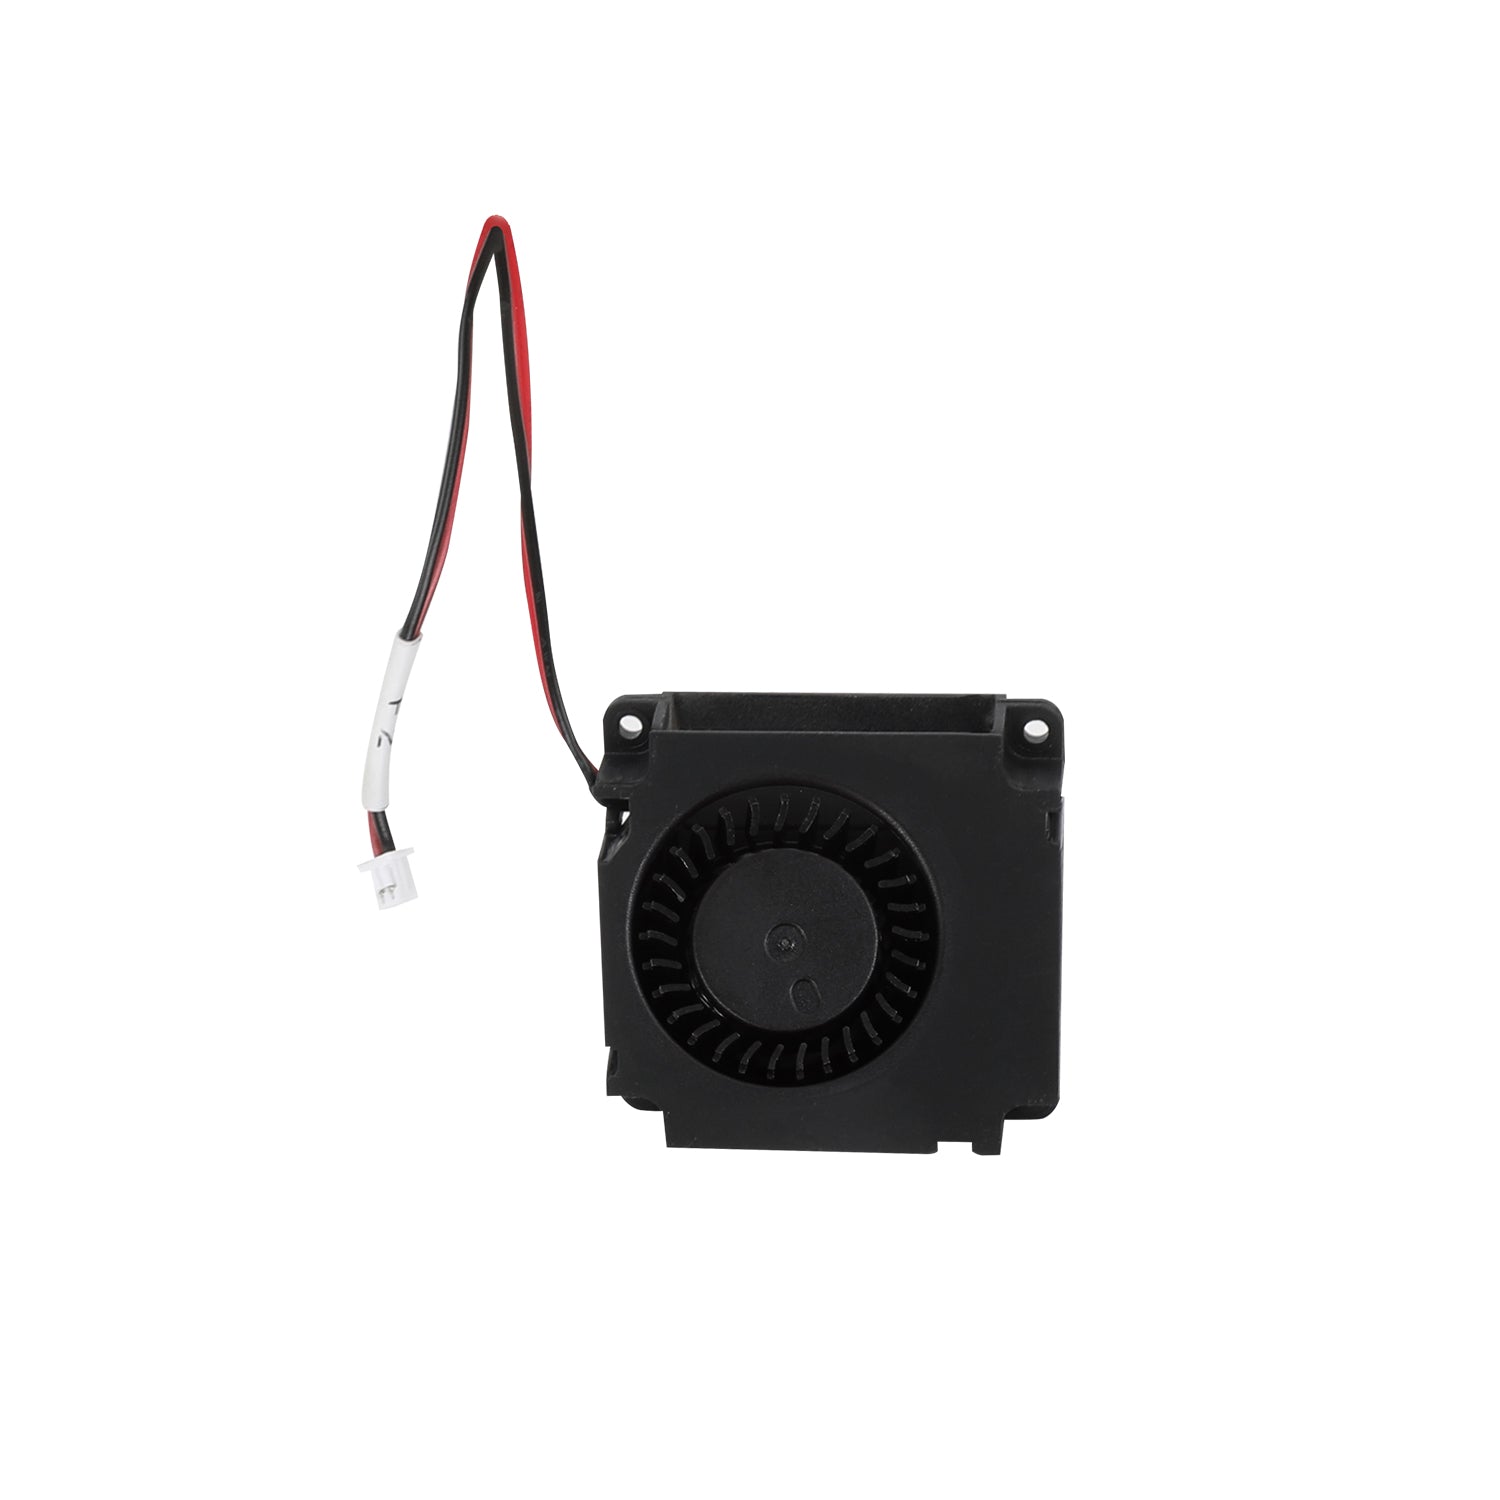 Creality Ender 3 S1/Pro/ CR10 Smart Pro/Sprite Hotend/Part Cooling Fan